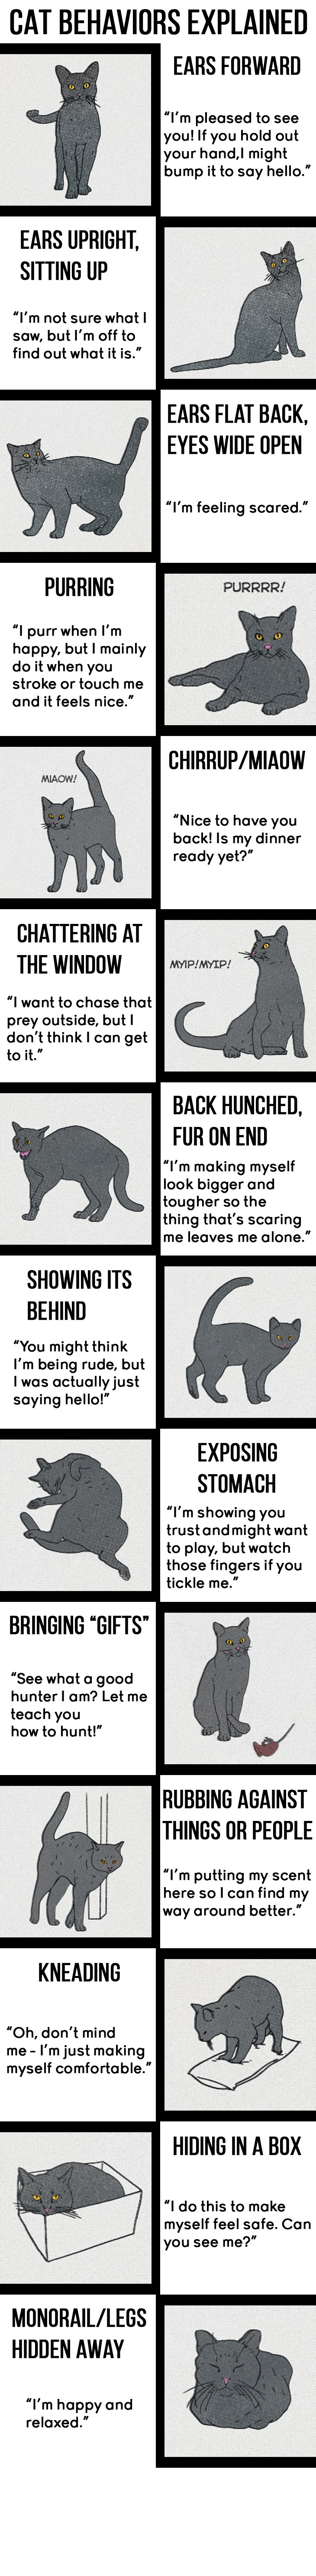 The Low-Down On Your Cat's Odd Behavior